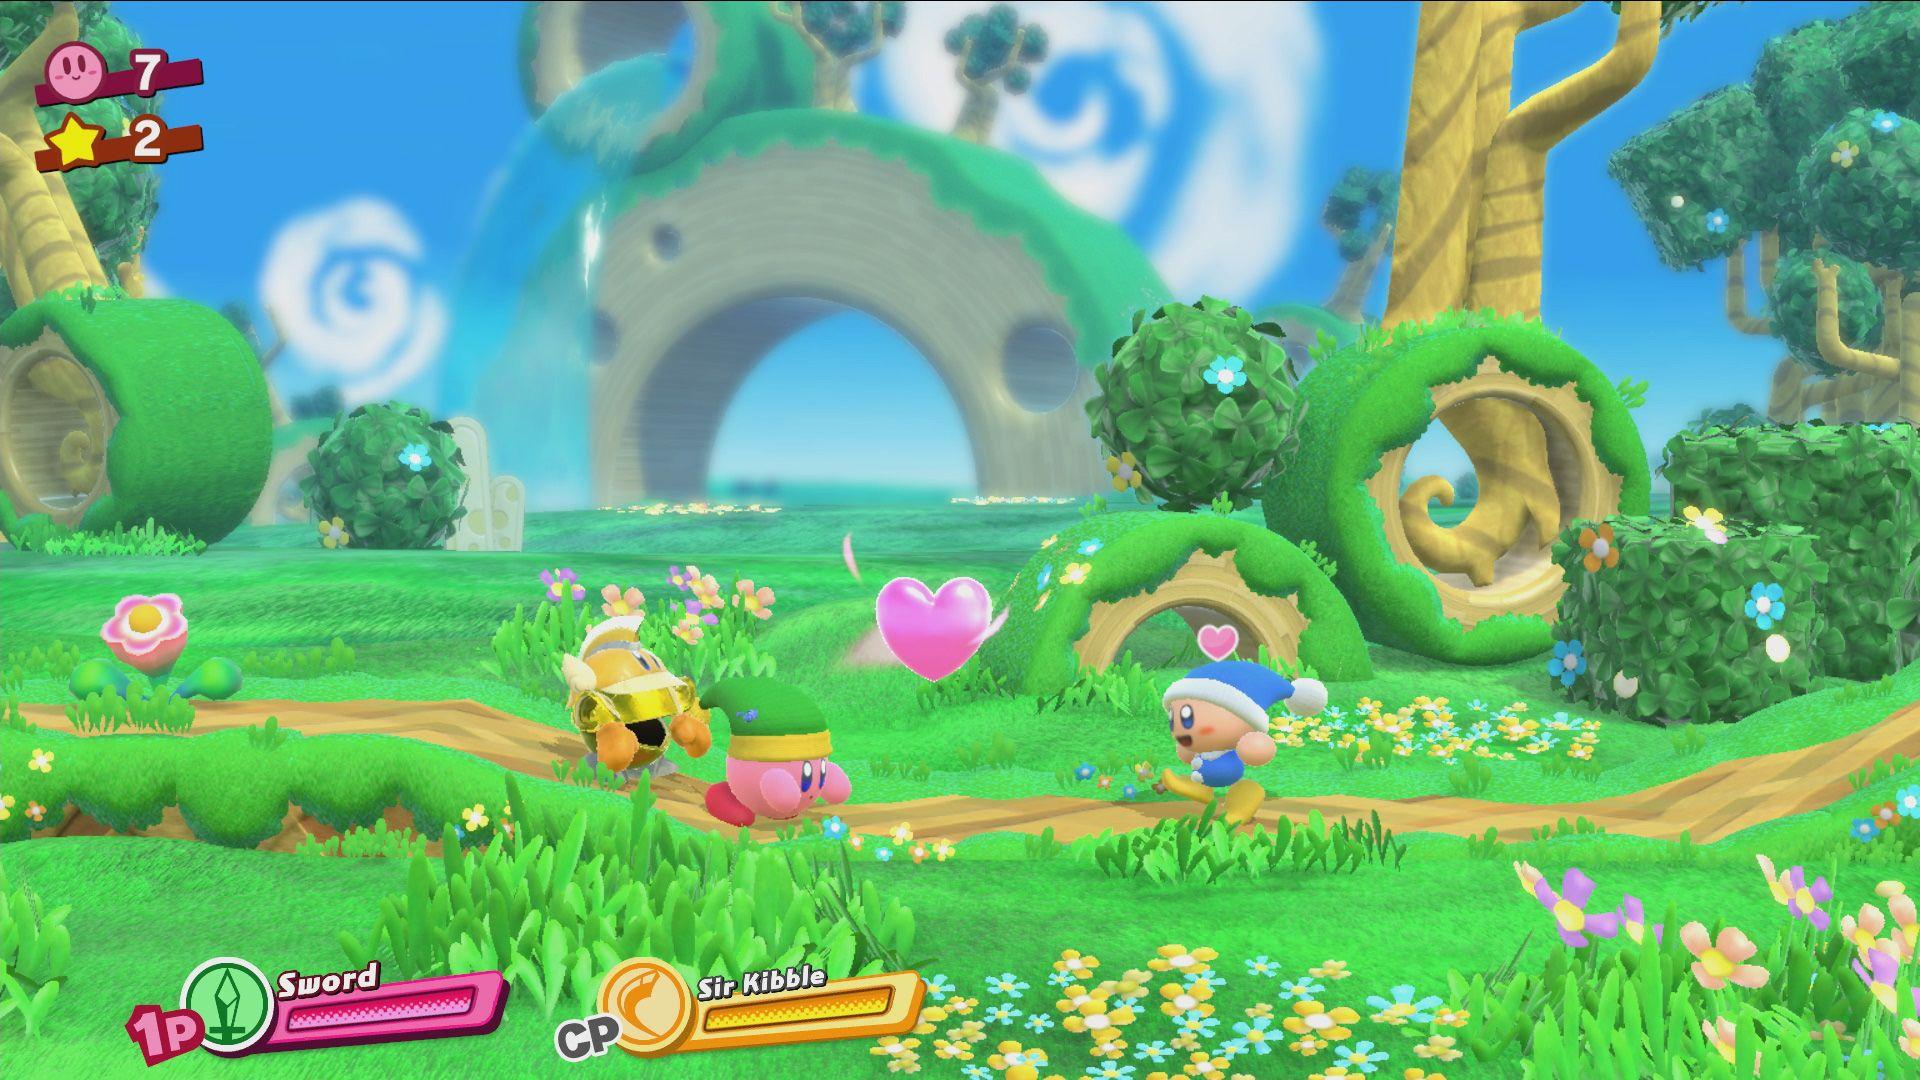 Review: Kirby Star Allies